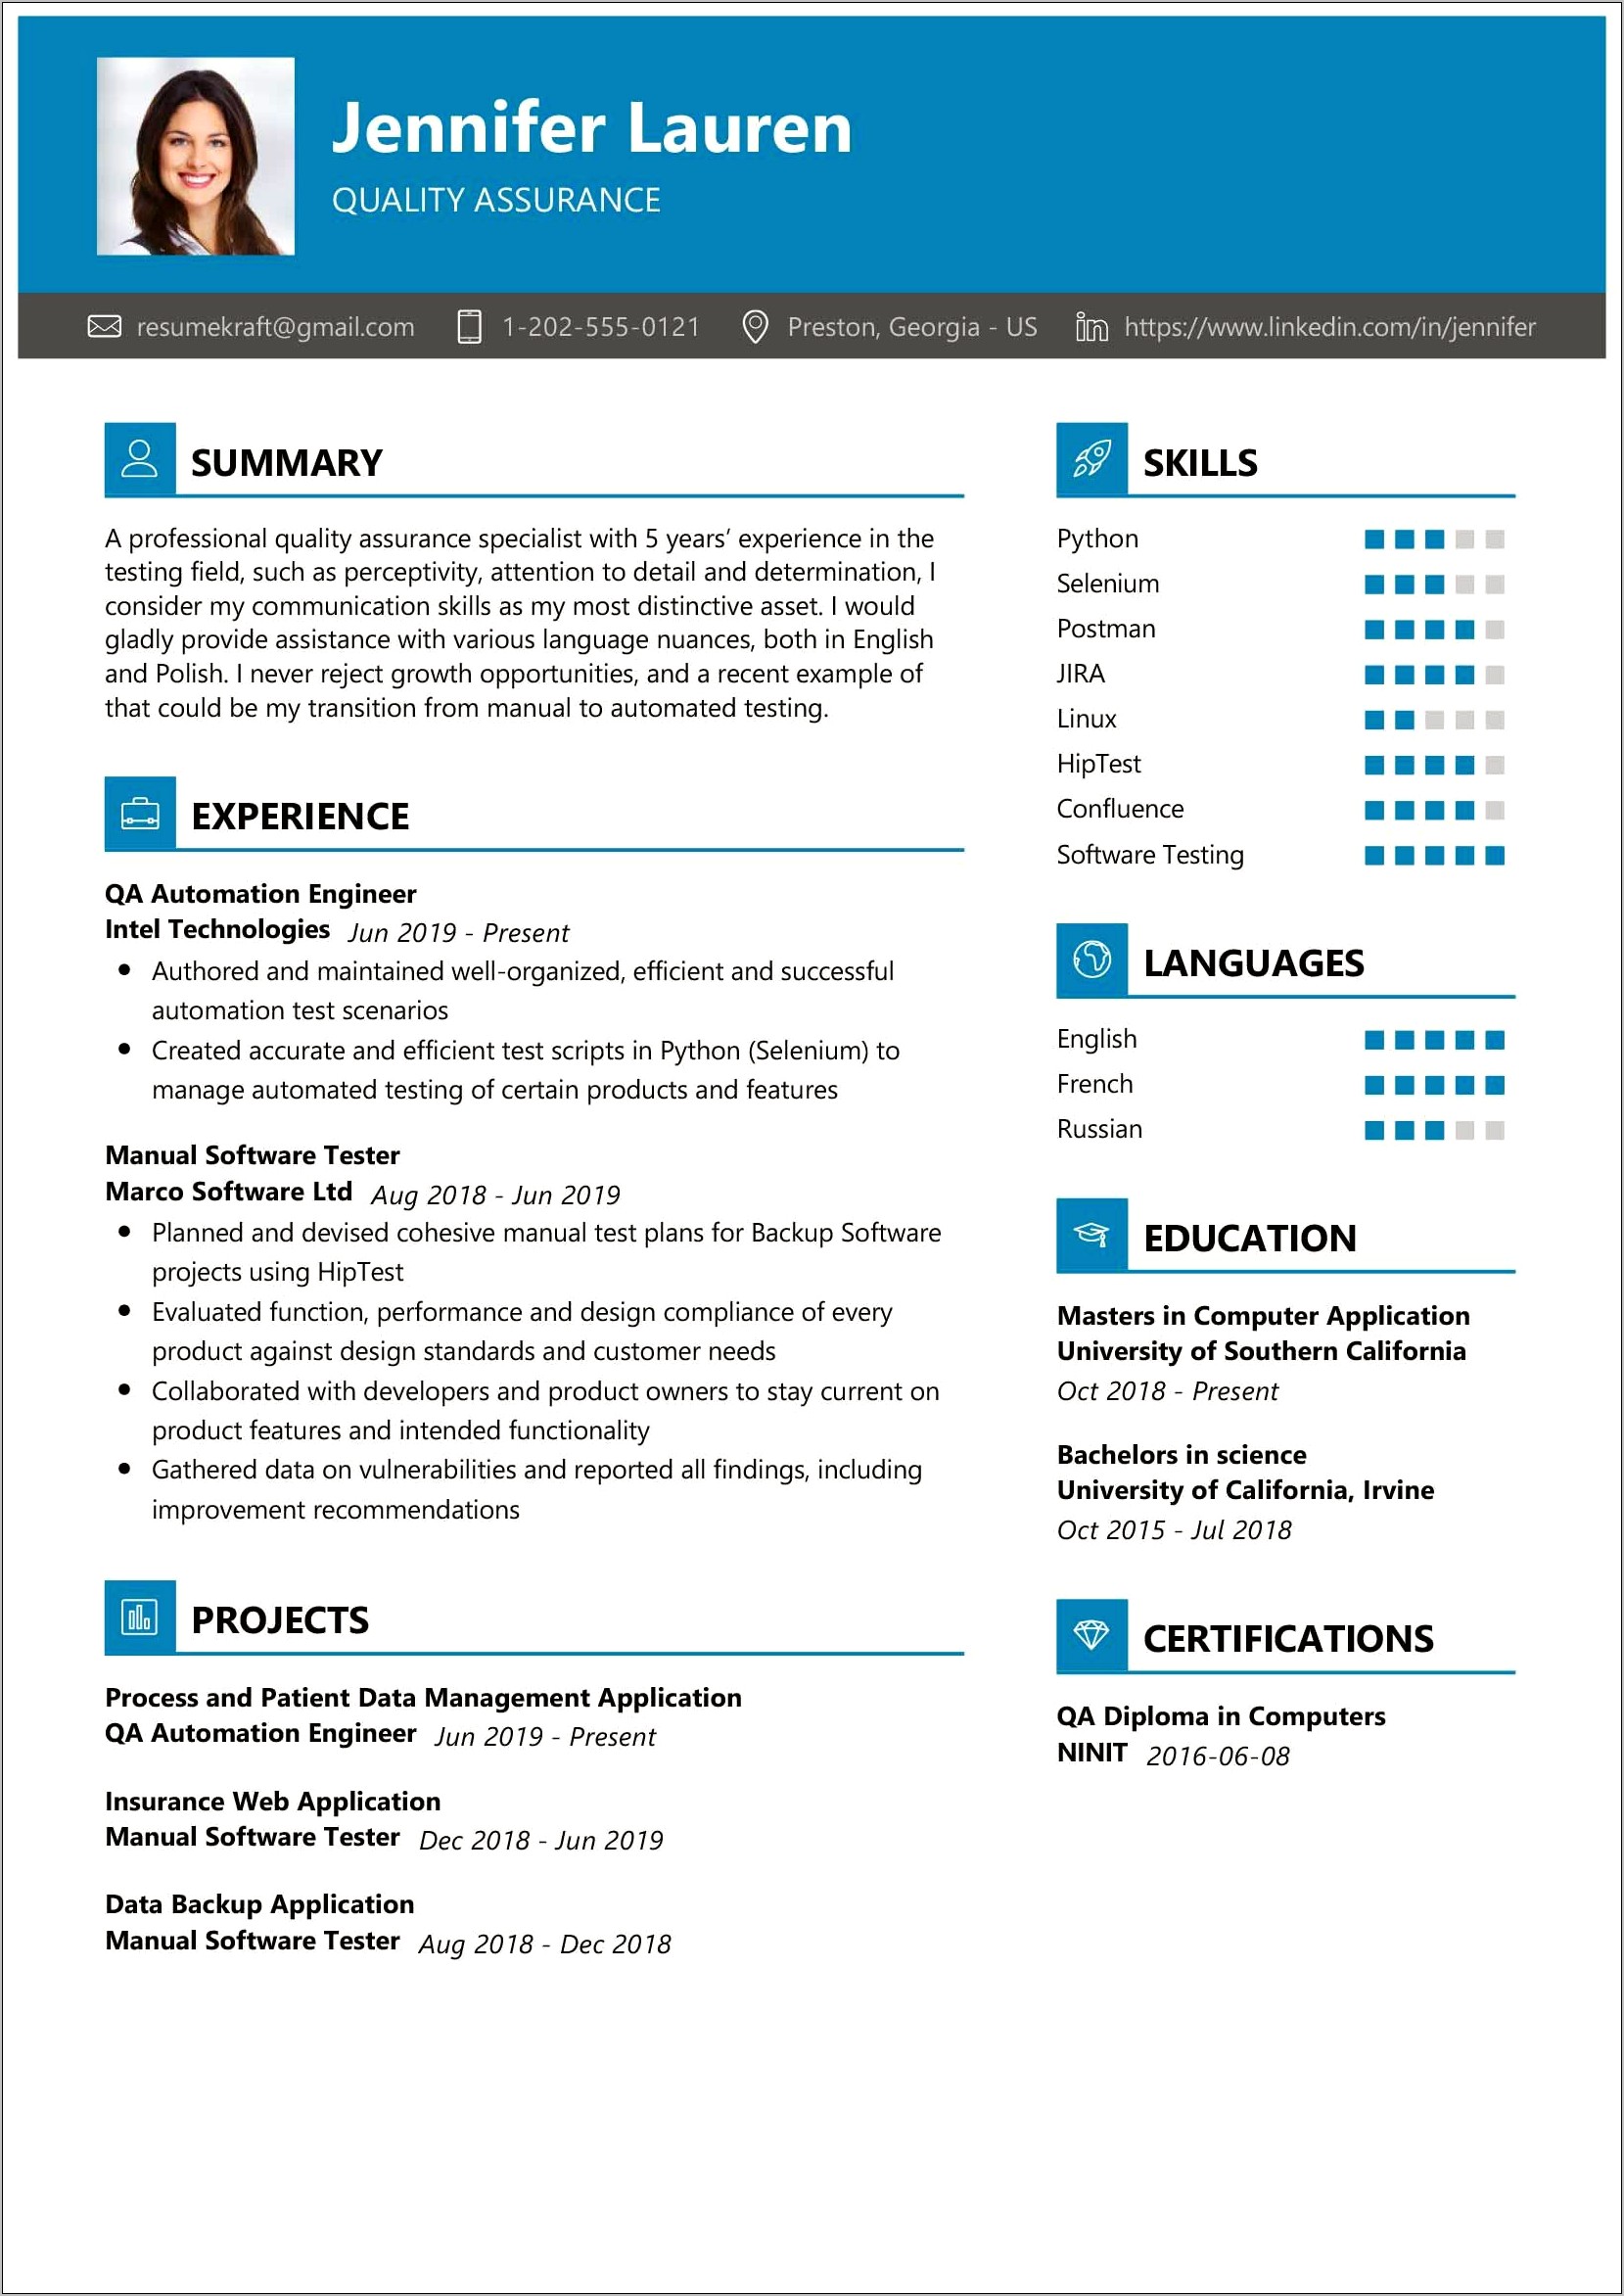 Resume Examples For Software Testers